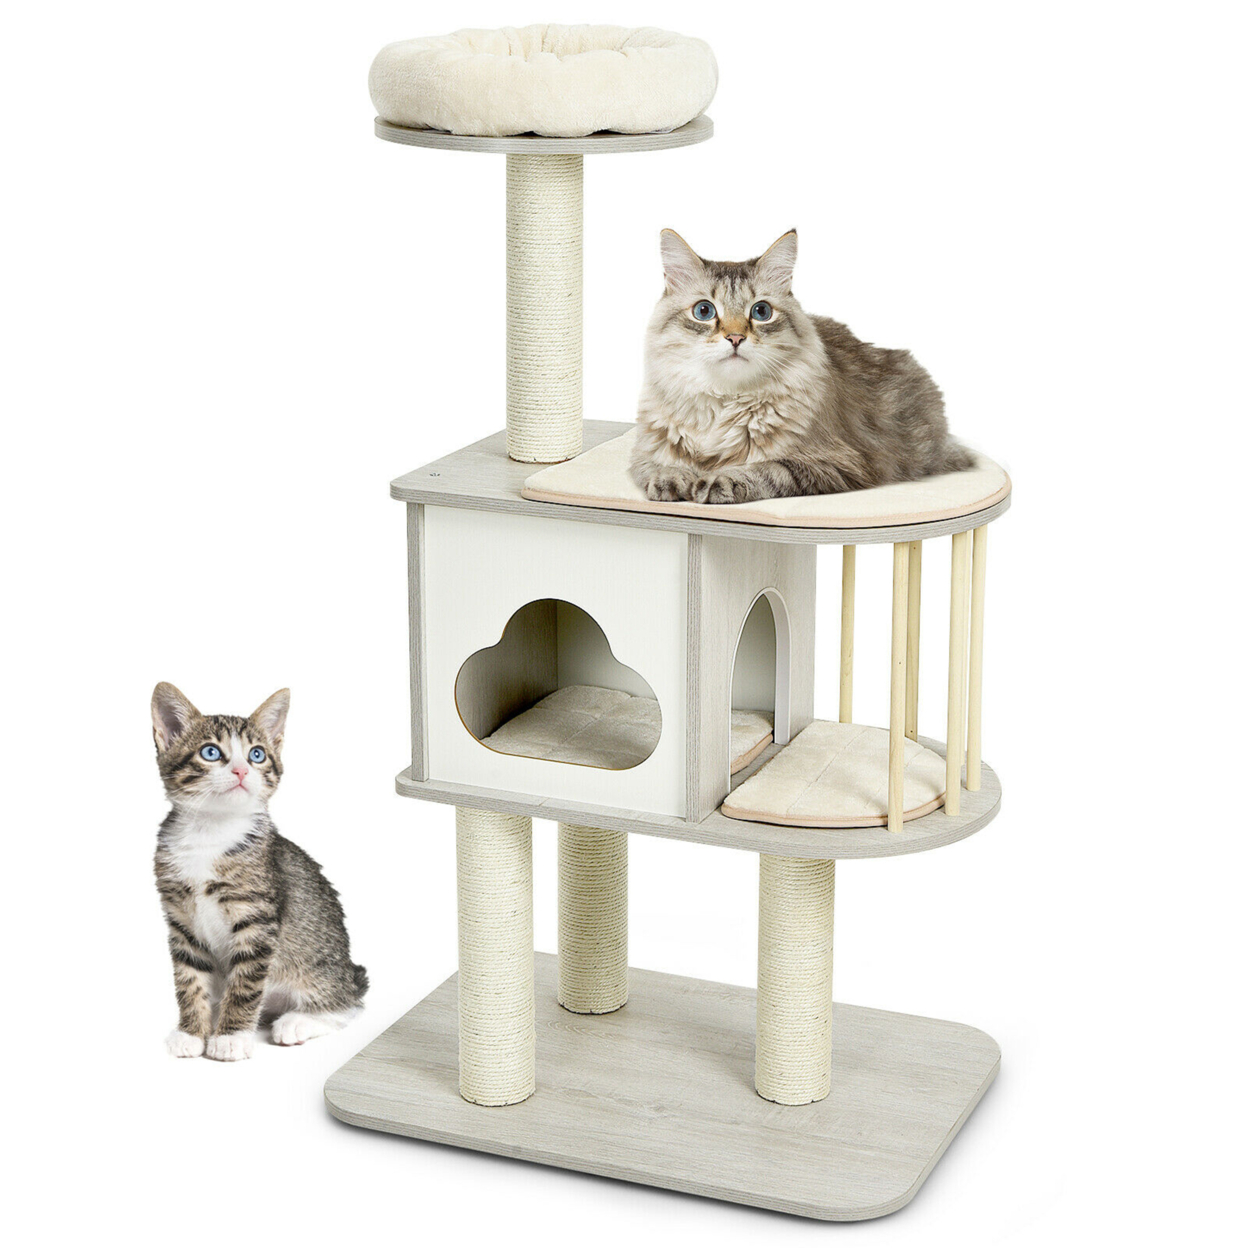 46'' Modern Wooden Cat Tree With Platform & Washable Cushions For Cats & Kittens